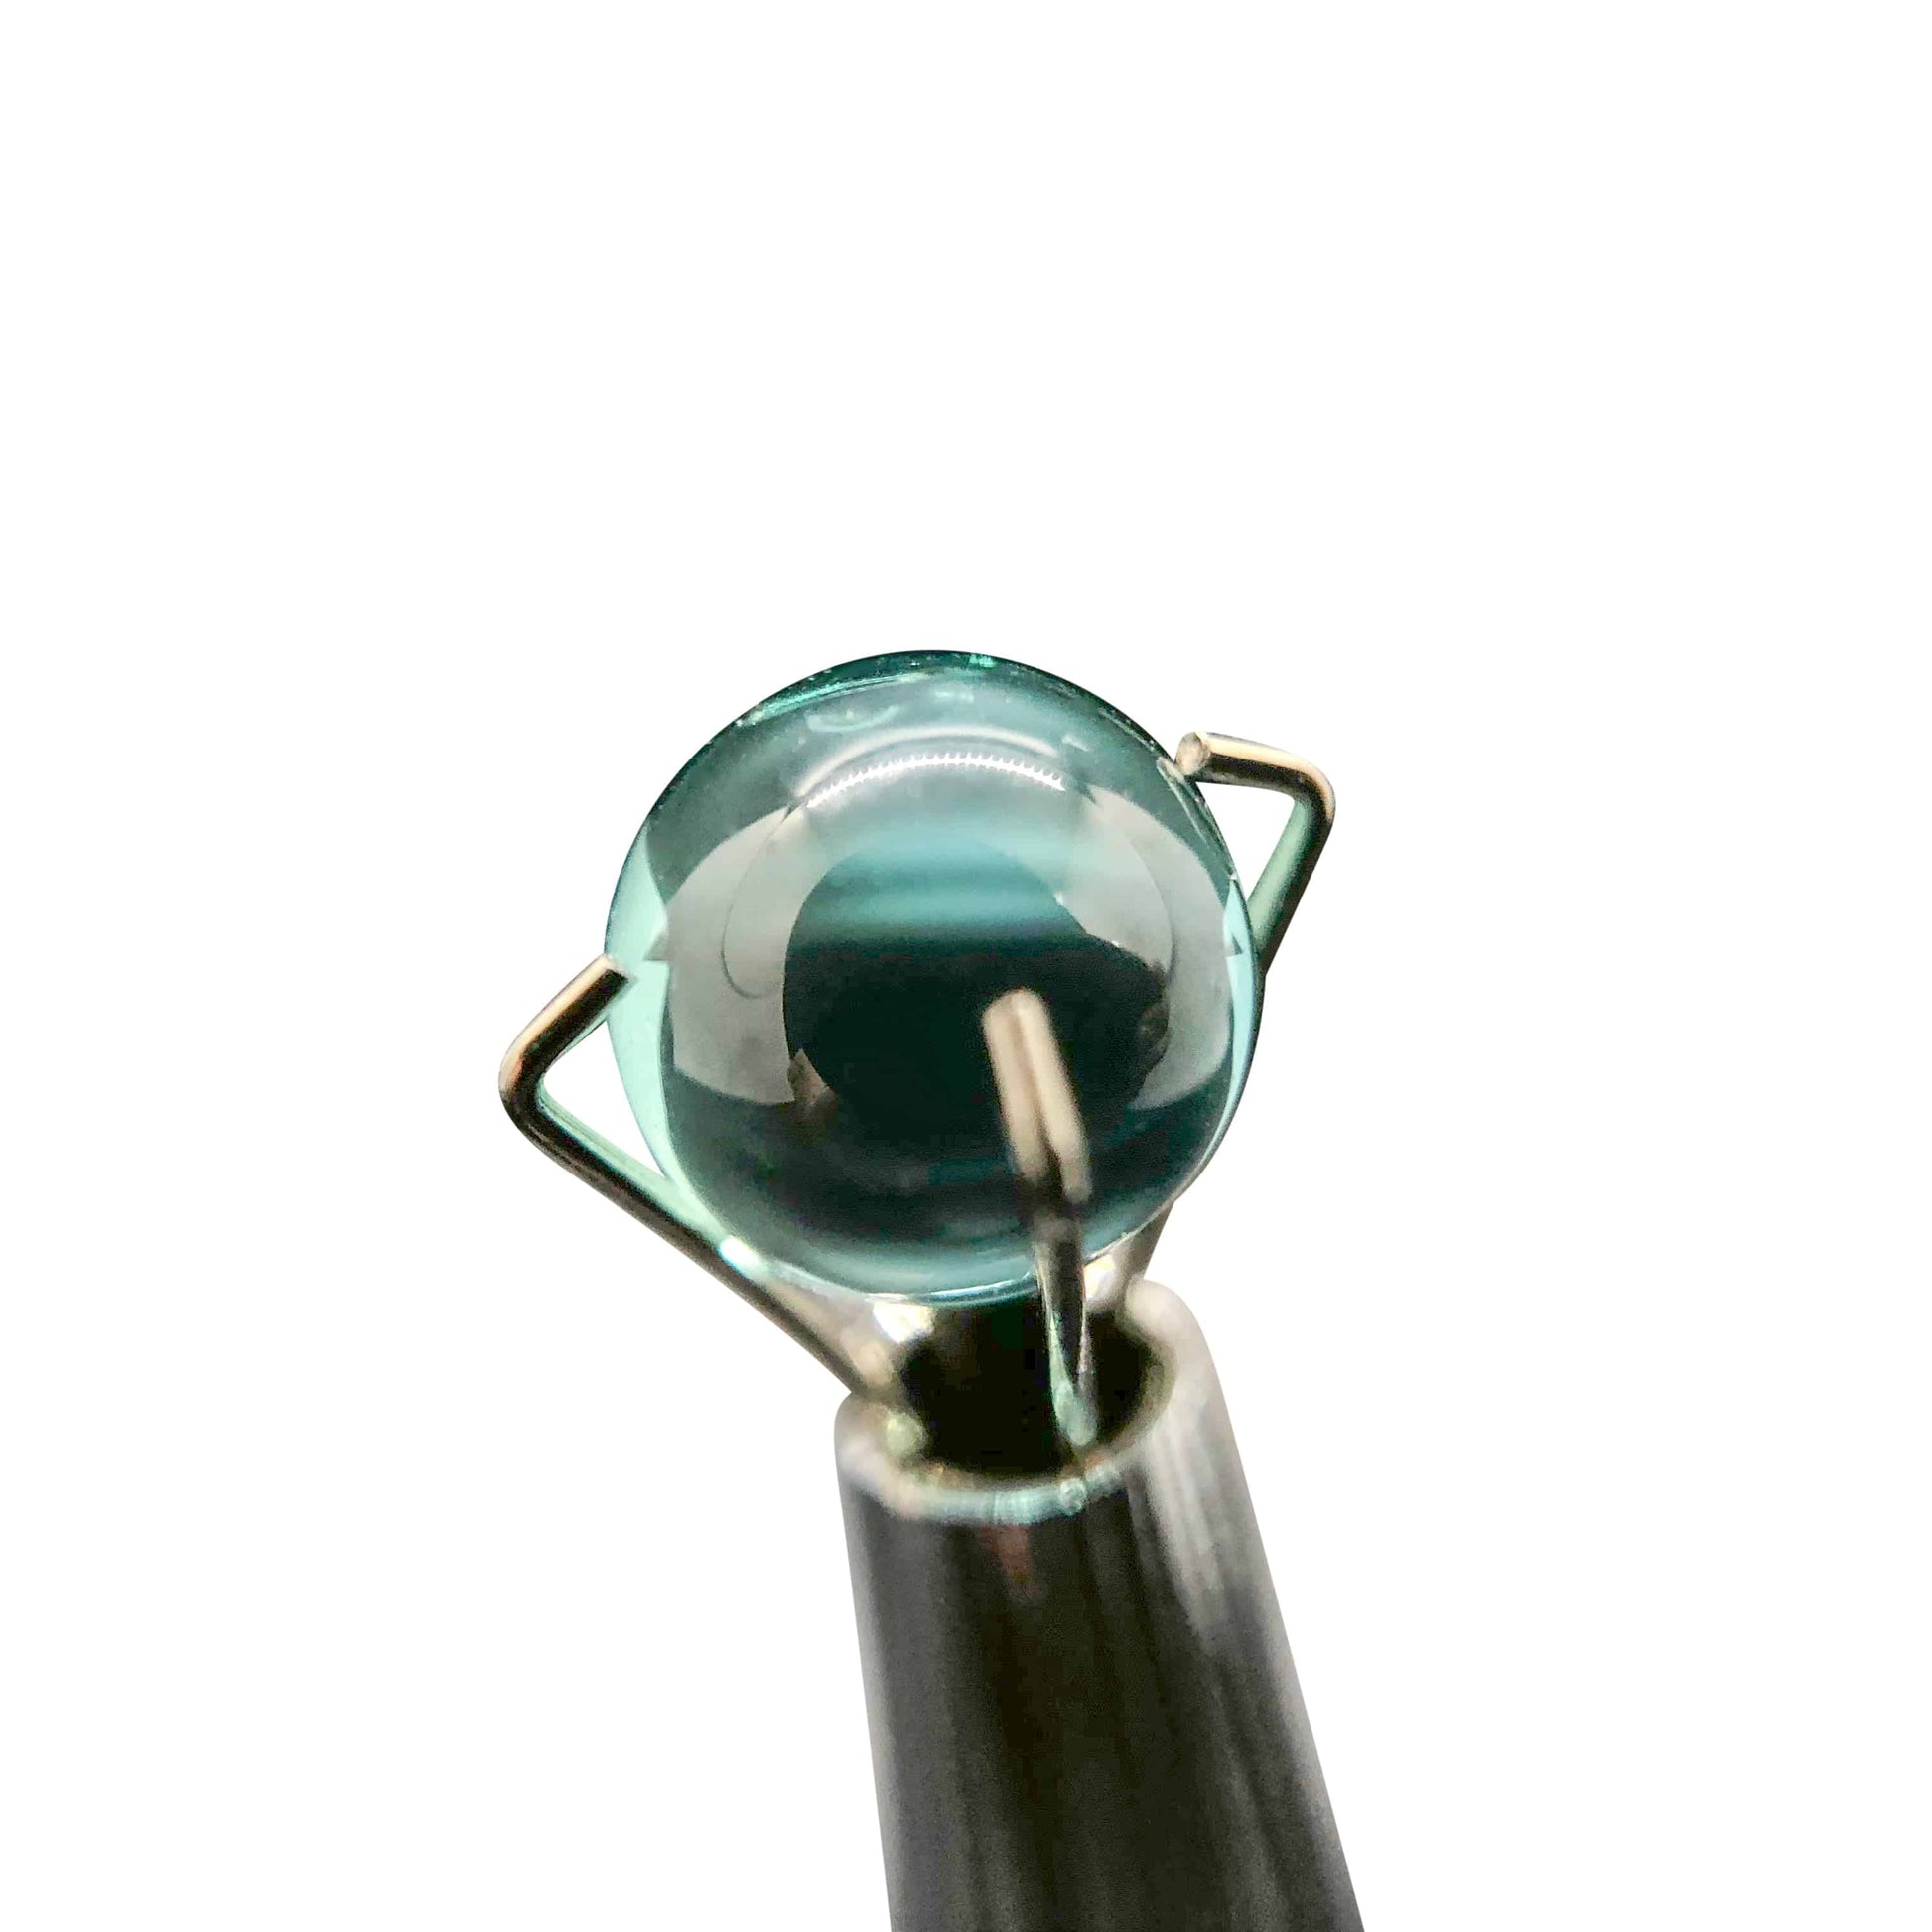 6mm Teal Sapphire Terp Pearls - OPS.com